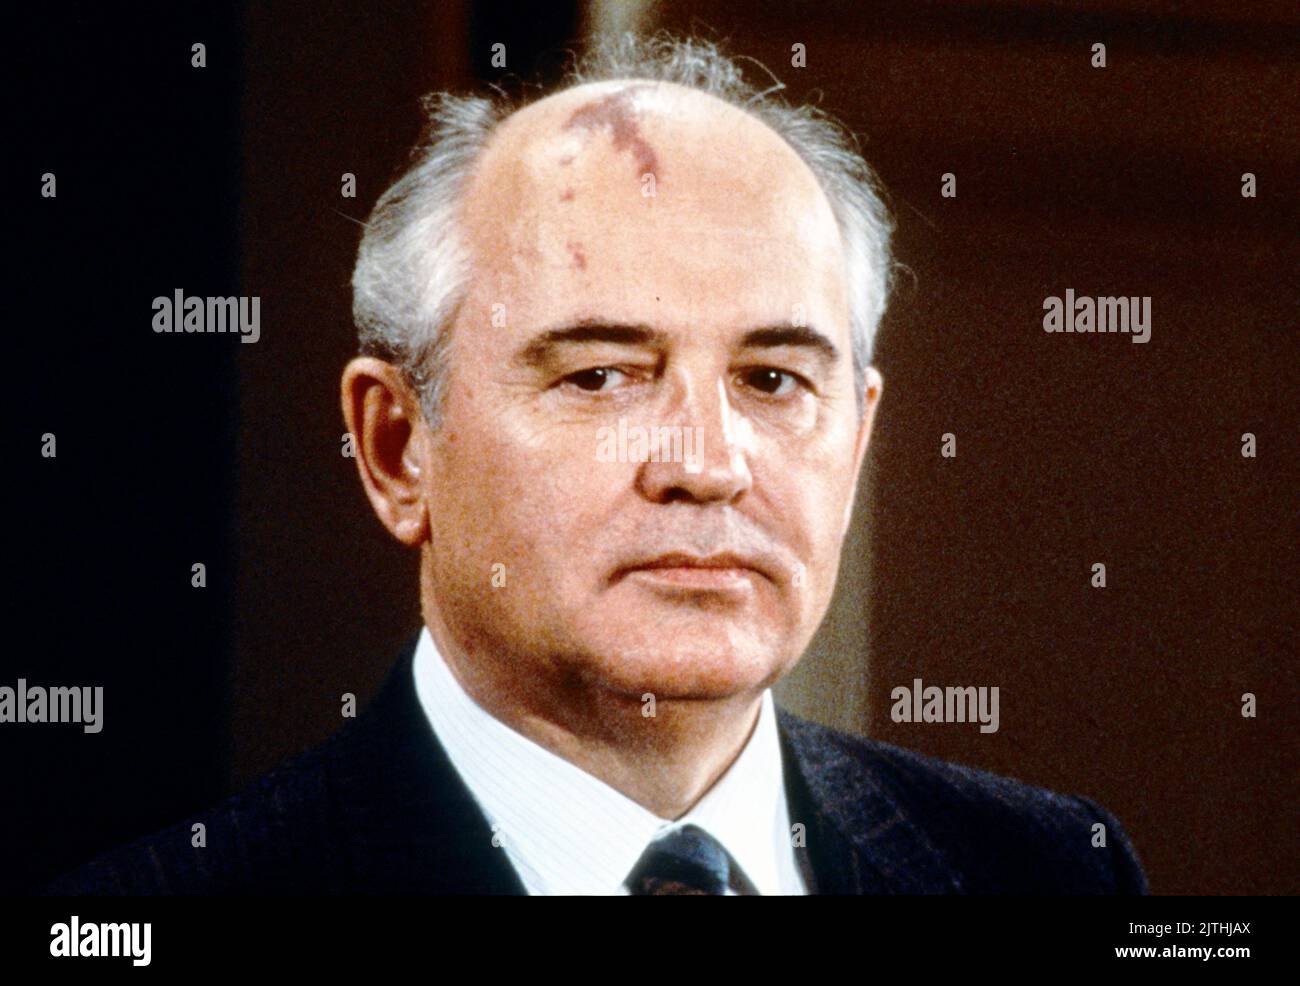 President Mikhail Gorbachev of the Soviet Union in the East Room of the White House in Washington, DC for the signing of the Intermediate-Range Nuclear Forces (INF) treaty with United States President Ronald Reagan on December 8, 1987. The agreement eliminated US and Soviet intermediate-and shorter-range nuclear missles and led to the elimination of more nuclear weapons. Photo byJim Colburn / Pool via CNP/ABACAPRESS.COM Stock Photo